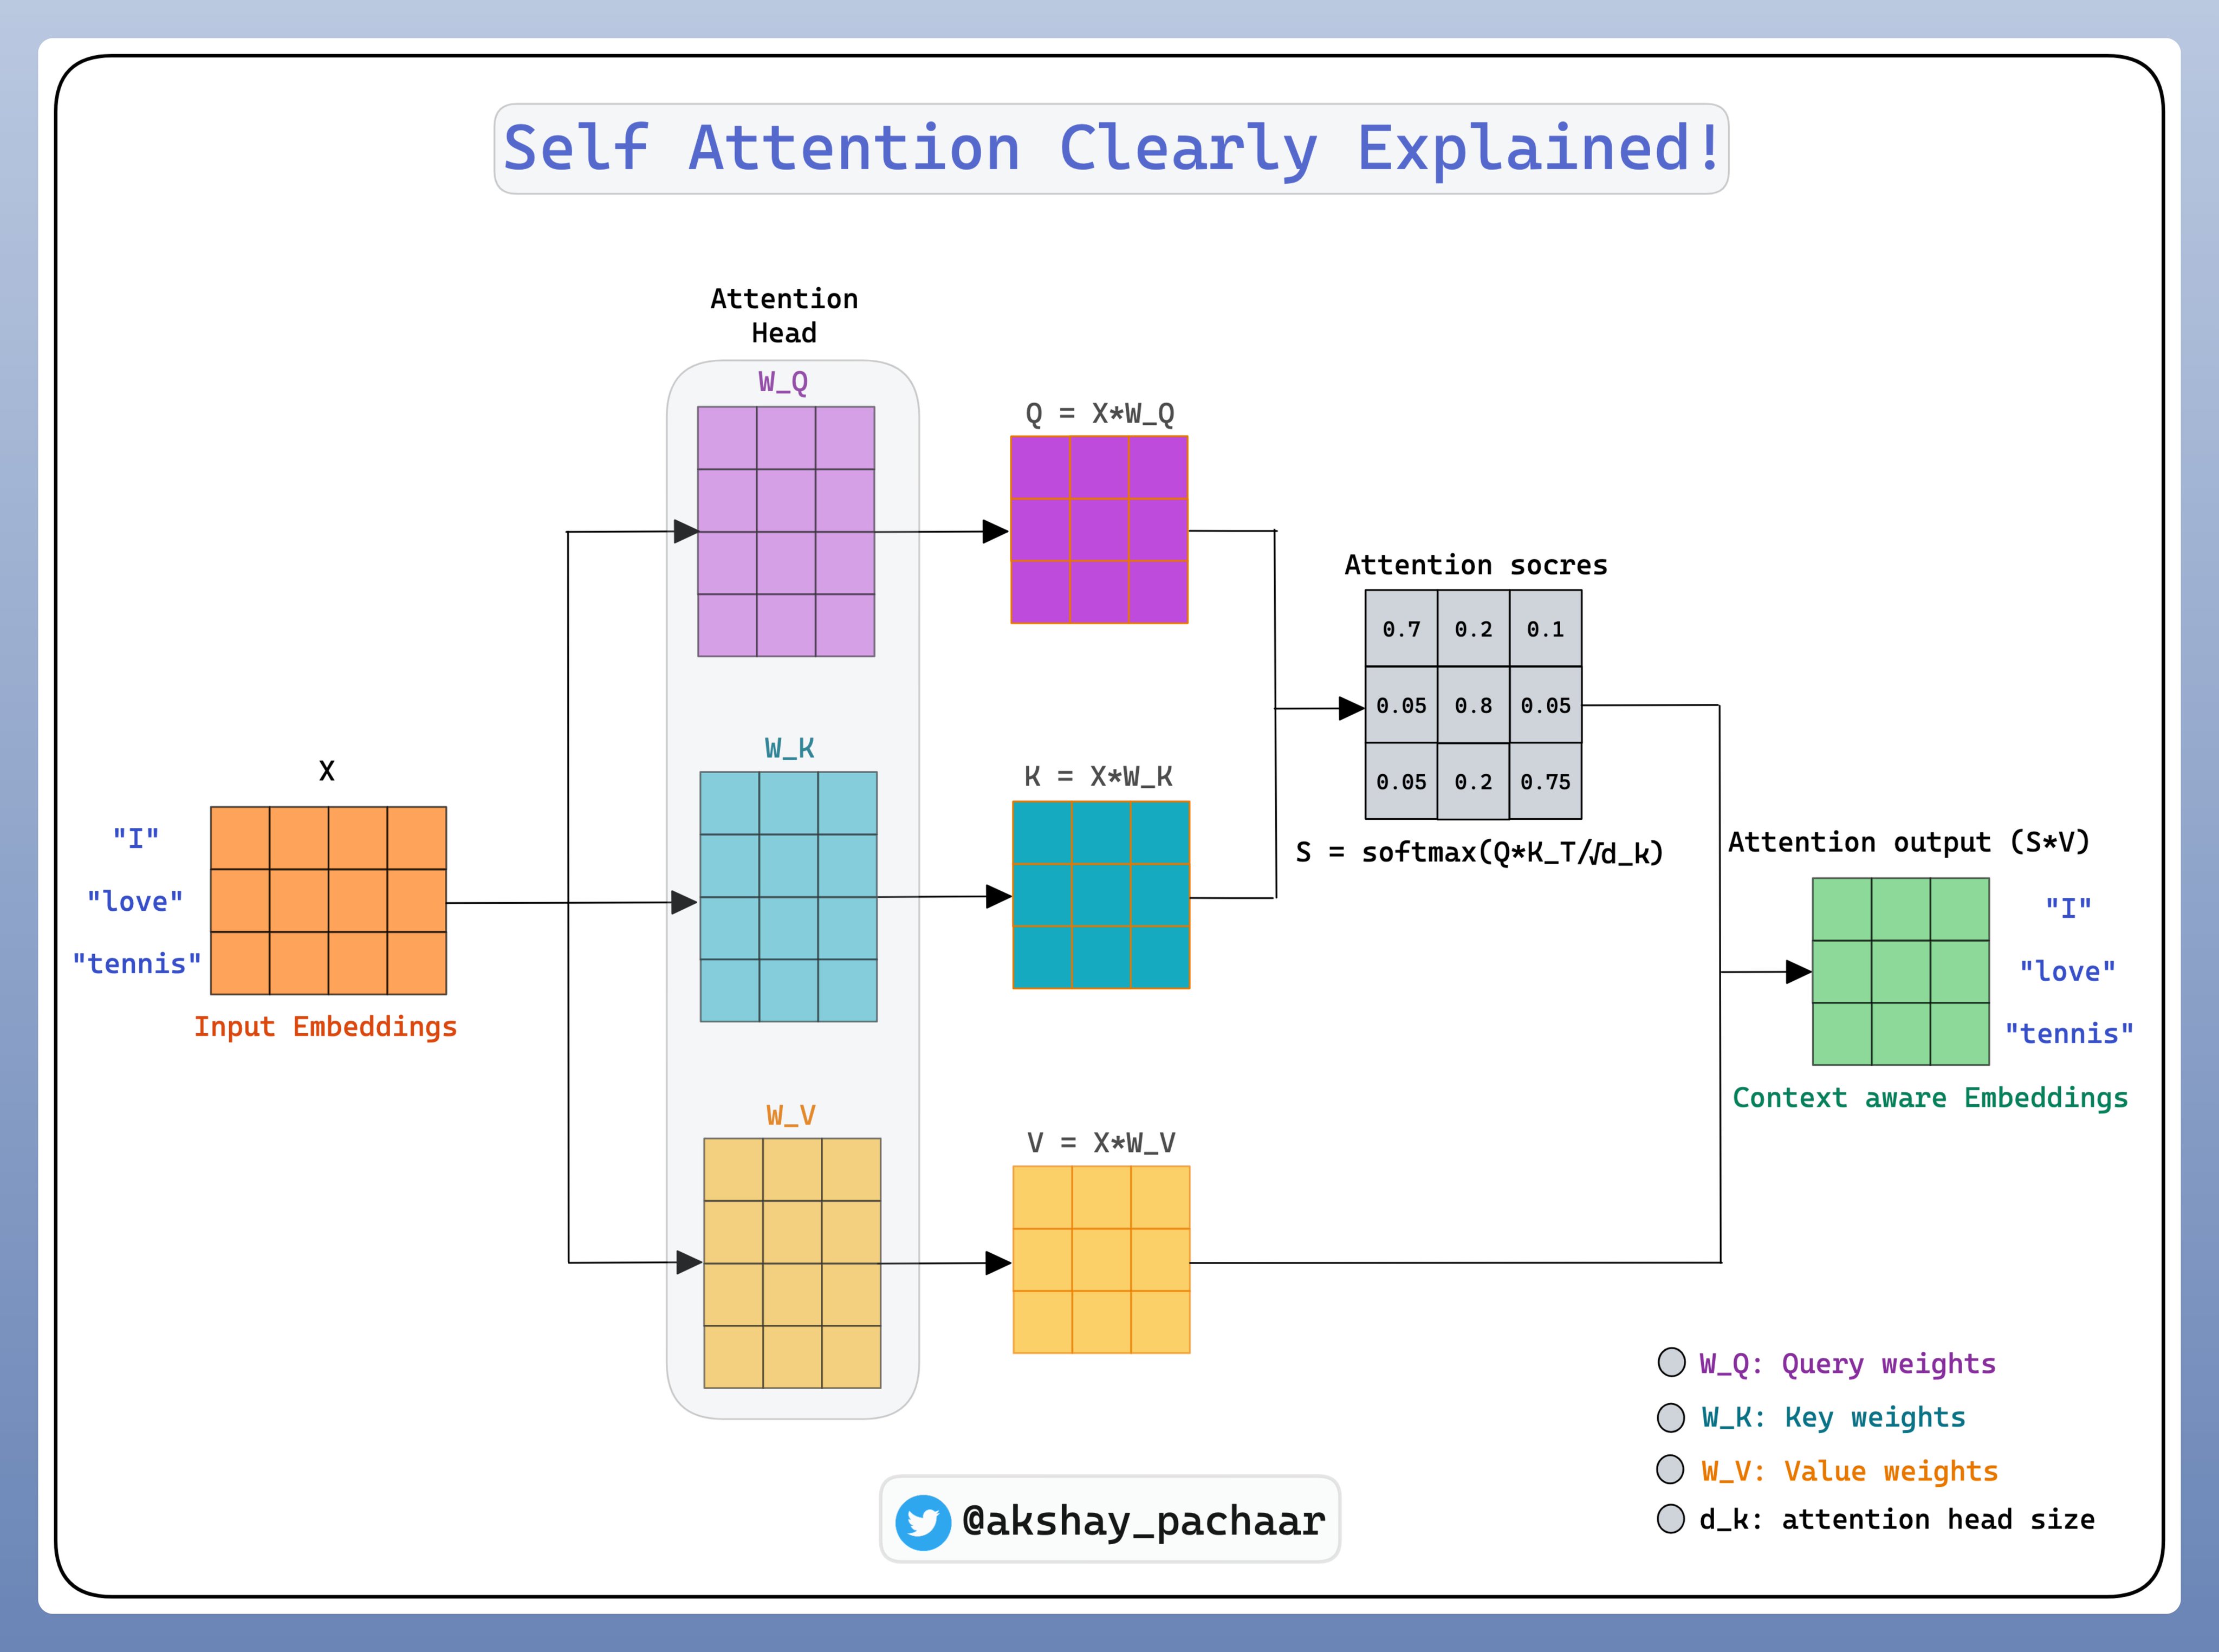 Self-attention